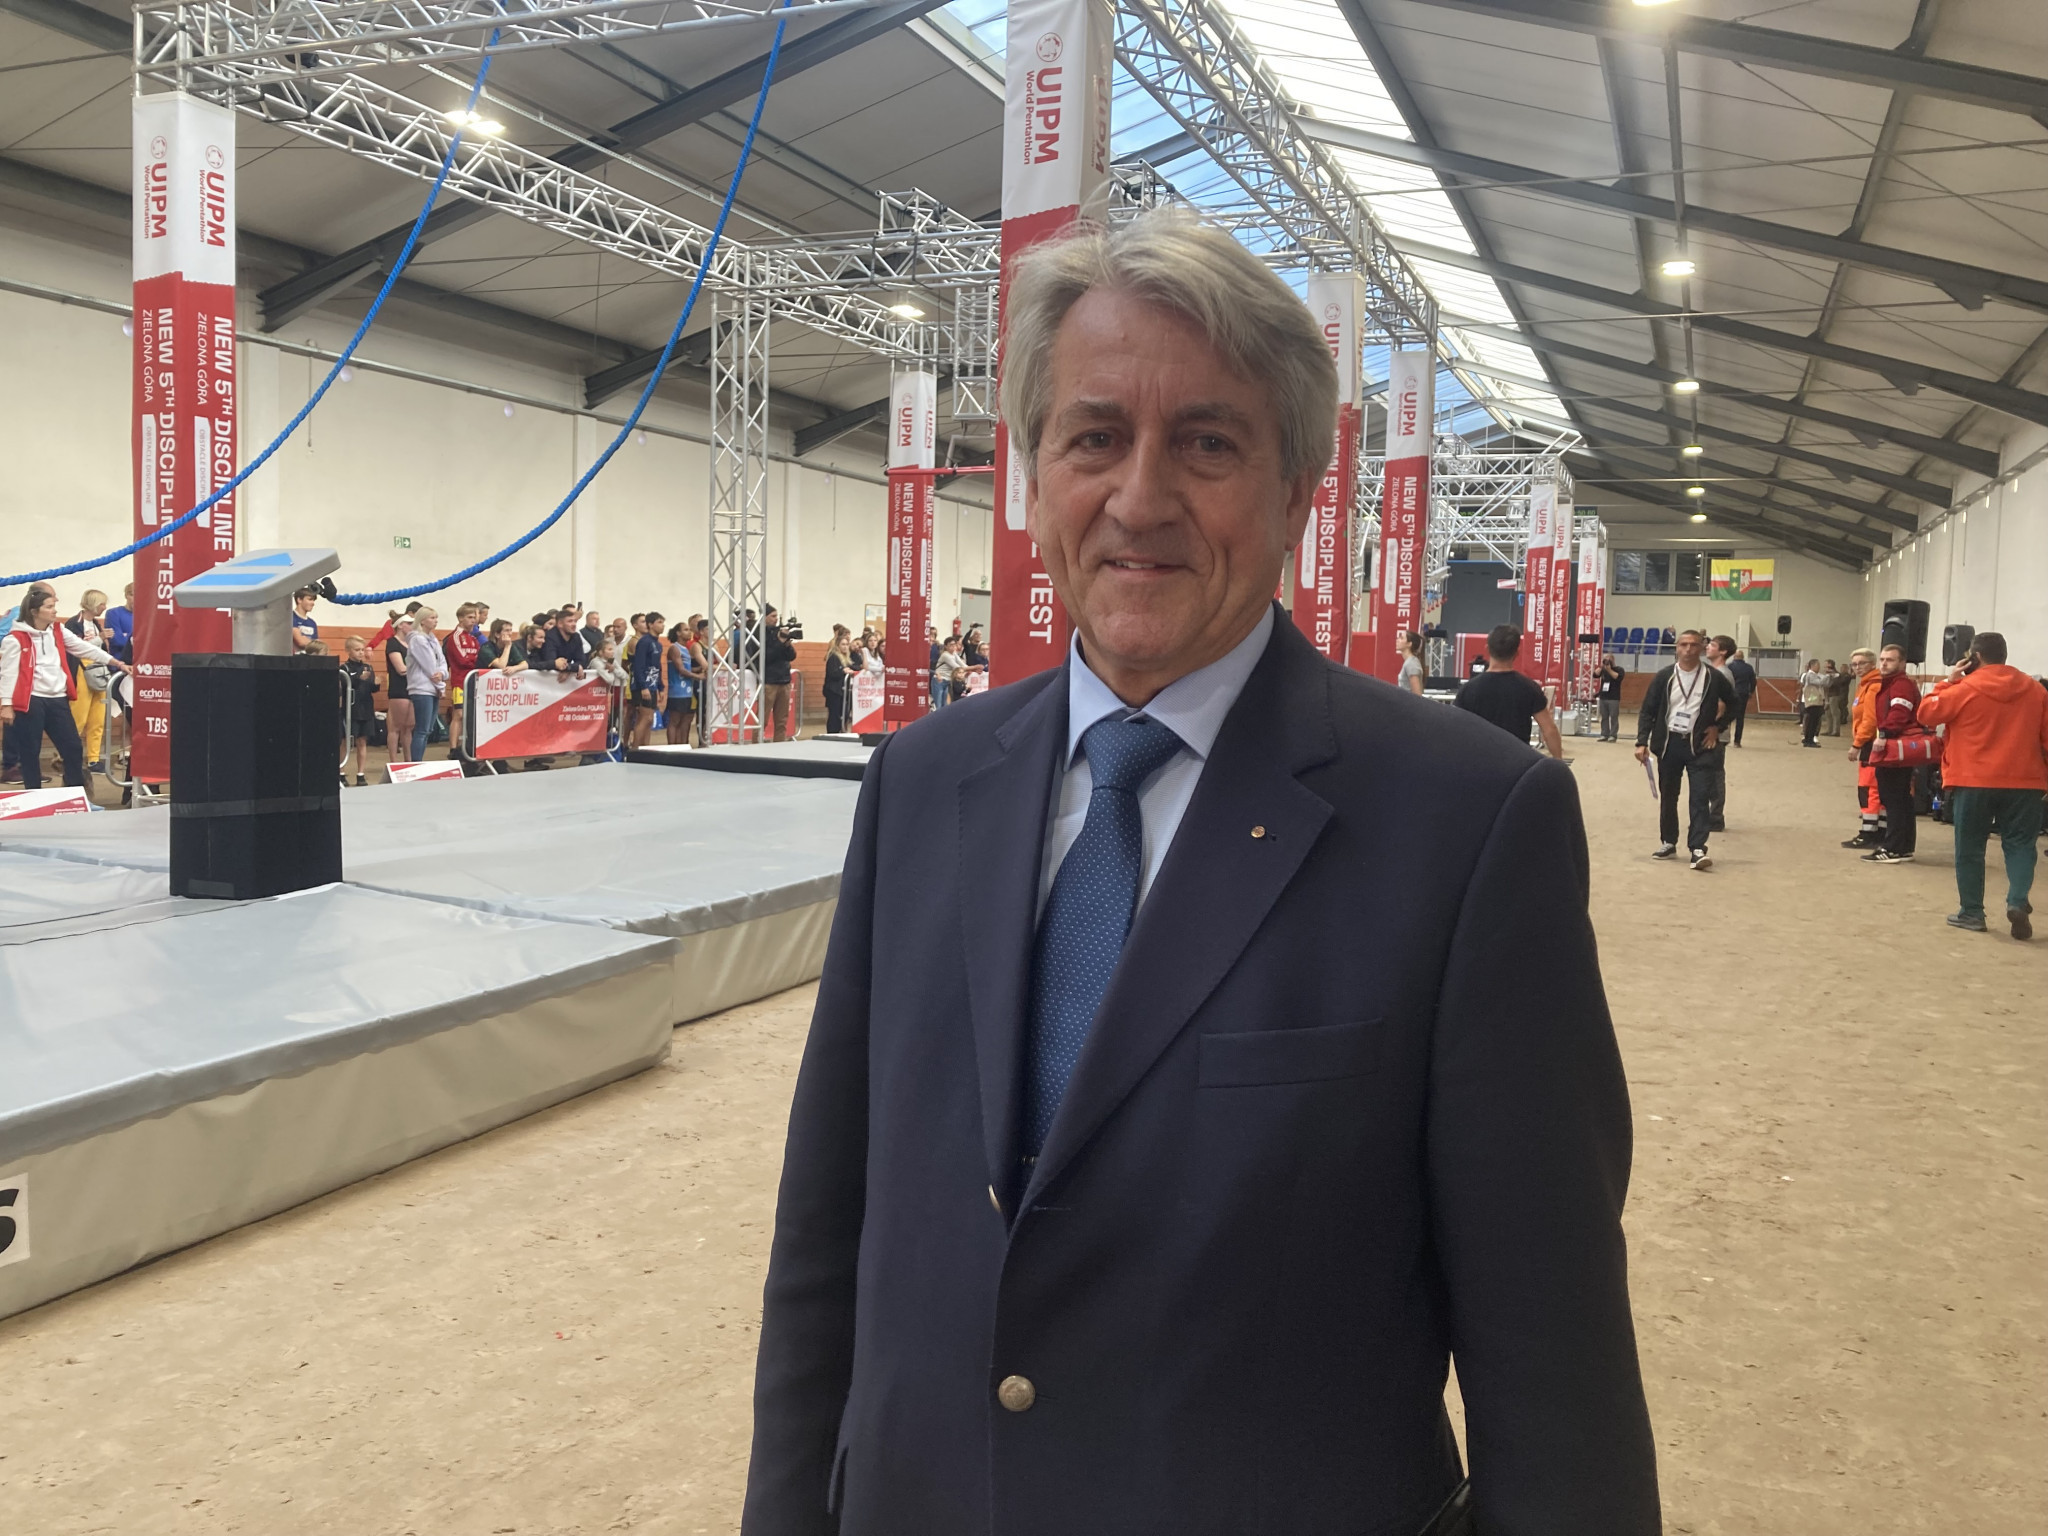 UIPM President Klaus Schormann has faced criticism over the decision to replace equestrian with obstacle racing as modern pentathlon's fifth discipline ©UIPM